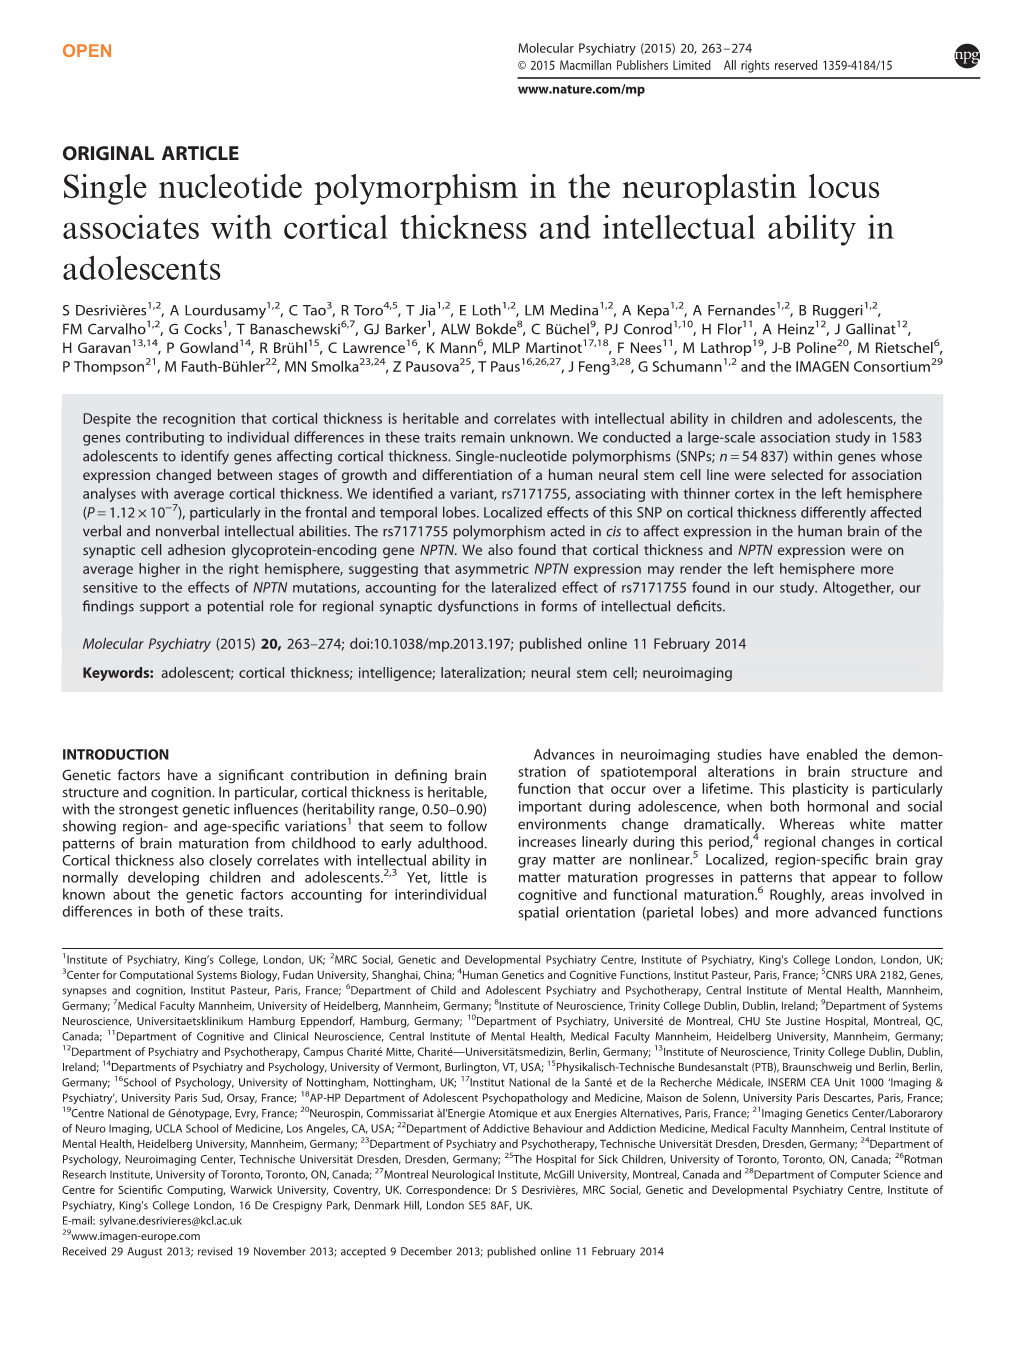 Single Nucleotide Polymorphism in the Neuroplastin Locus Associates with Cortical Thickness and Intellectual Ability in Adolescents